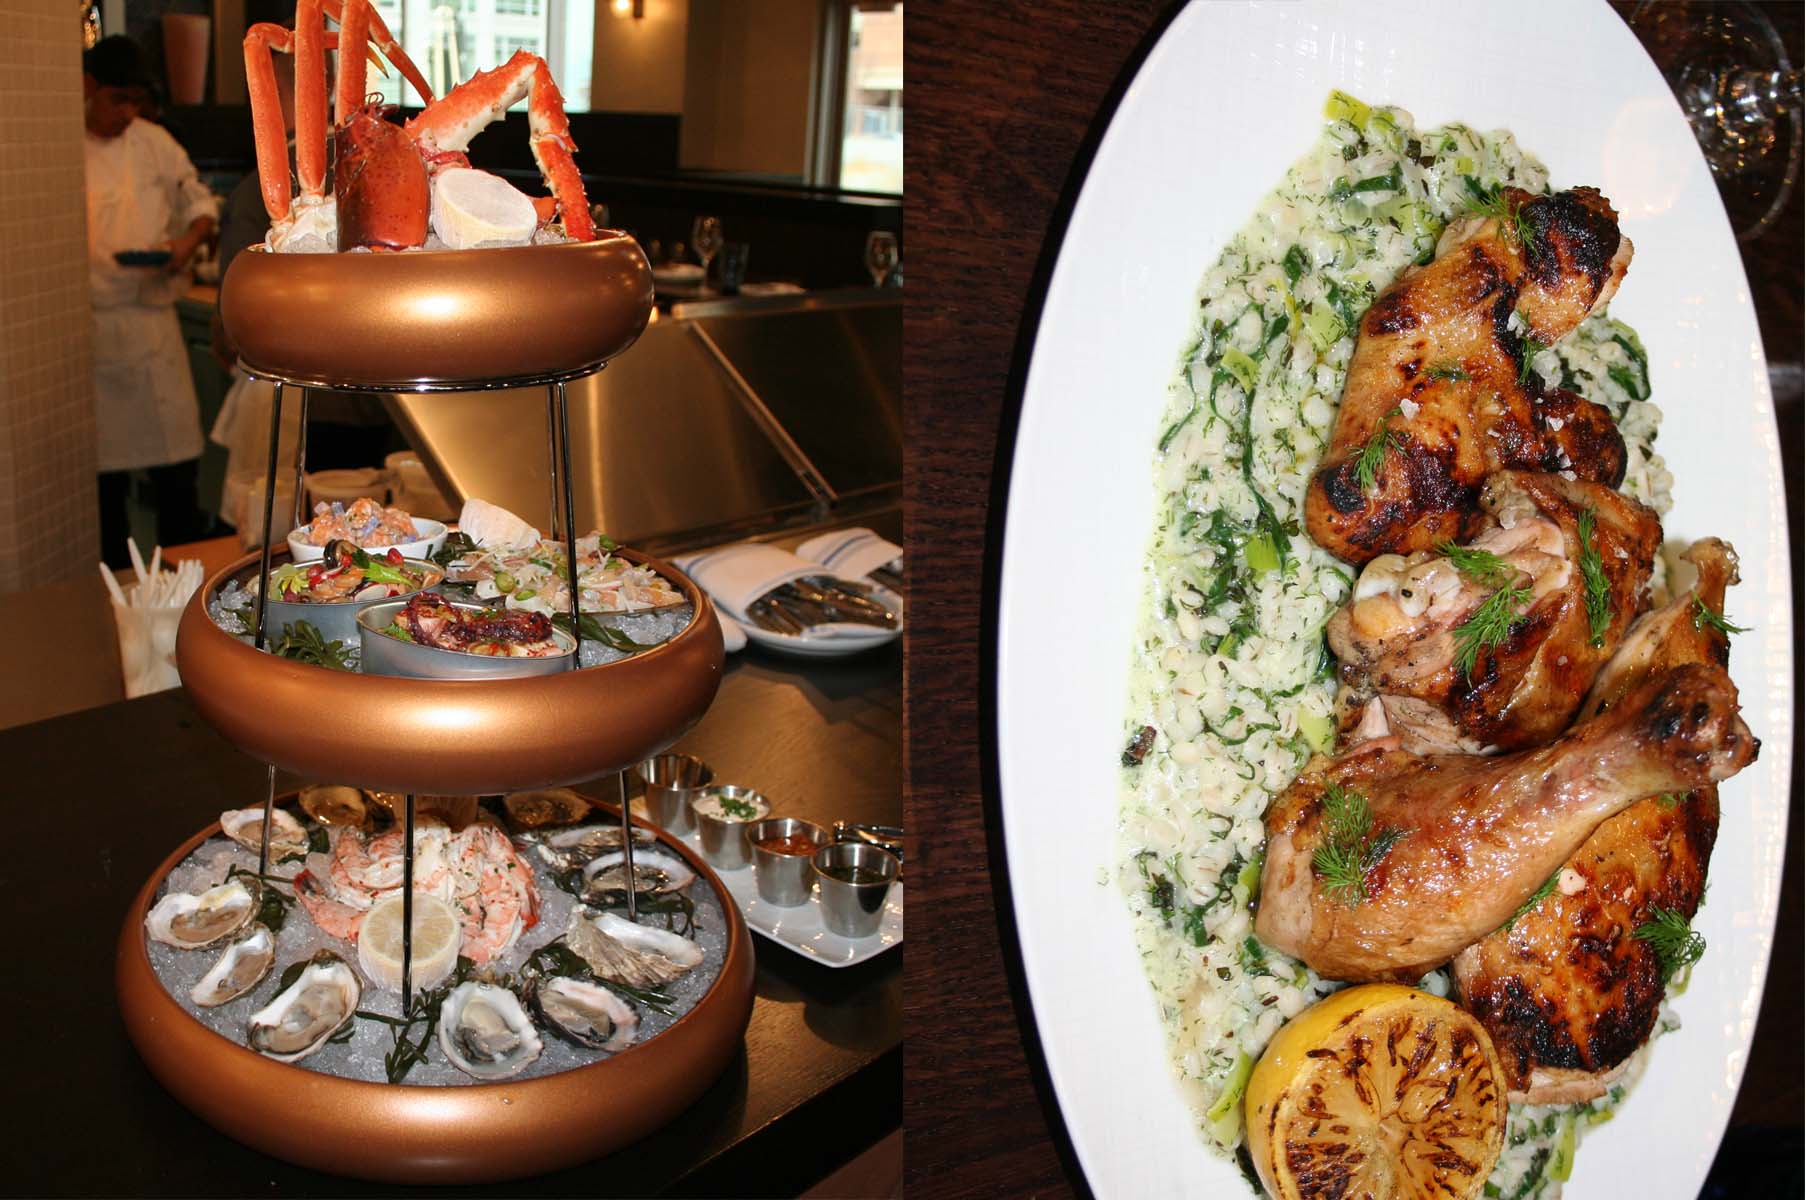 Dishes at Kapnos Taverna includes the $125 Seafood Tower (left) and spanakorizo, rotisserie chicken served on barley with spinach, barley, dill and charred lemon. (Photo: Mark Heckathorn/DC on Heels)